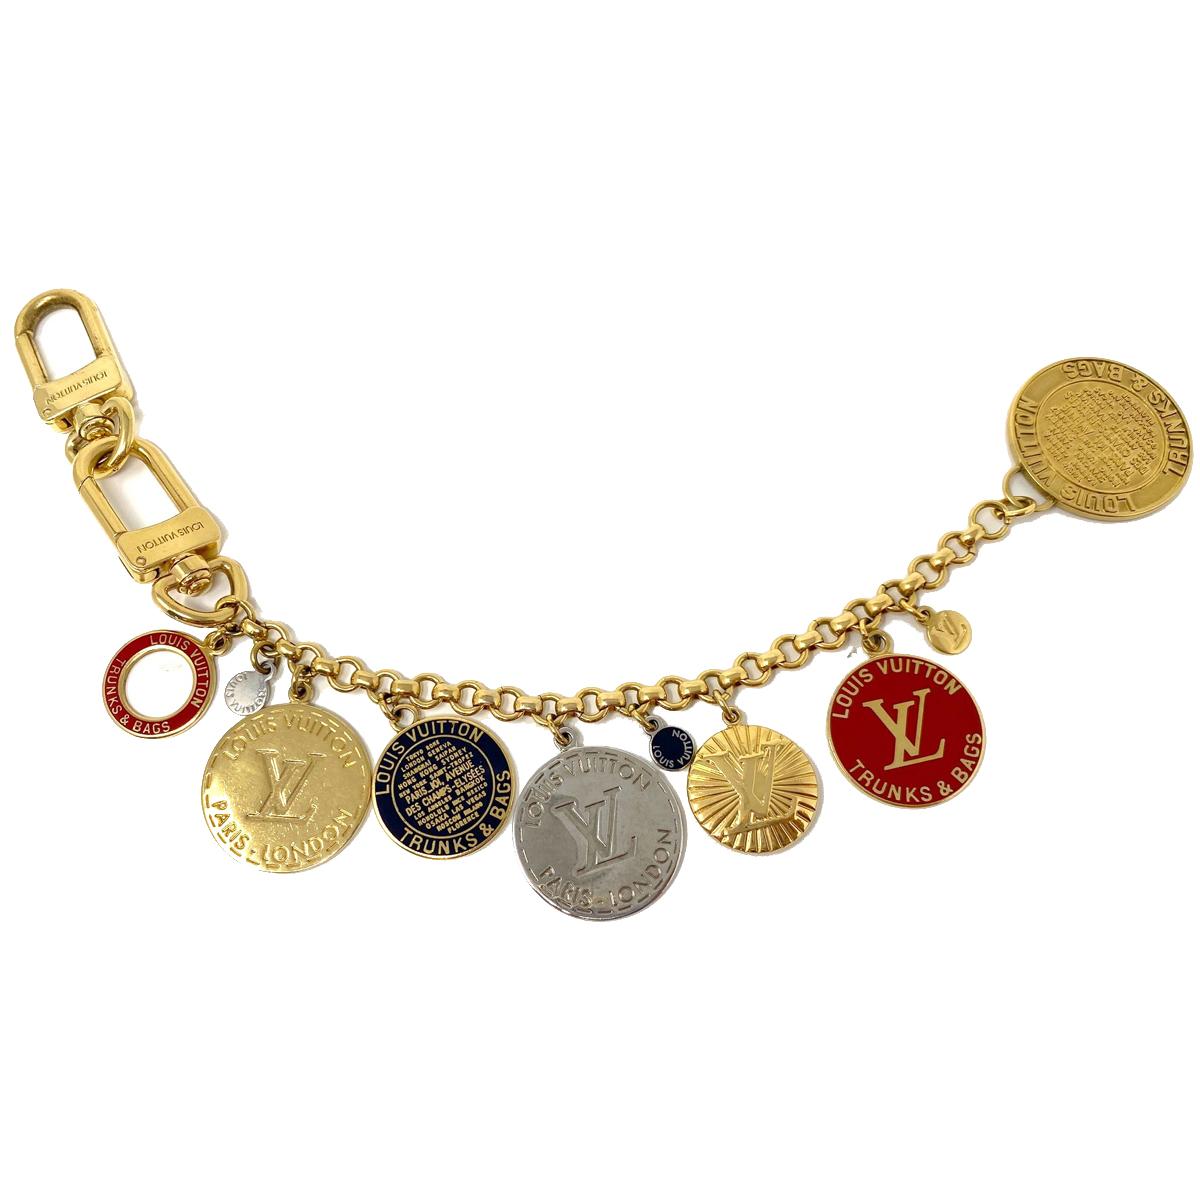 Company-Louis Vuitton 
Style-Trunks and Bags Multicolor Chain Bag Charm   
Charms-Charms all have wear consistent with age and use 
Hooks -two clip on clasps on bag charm
Charm Colors-2 red charms , 3 Gold Charms , 2 blue 
Handles/